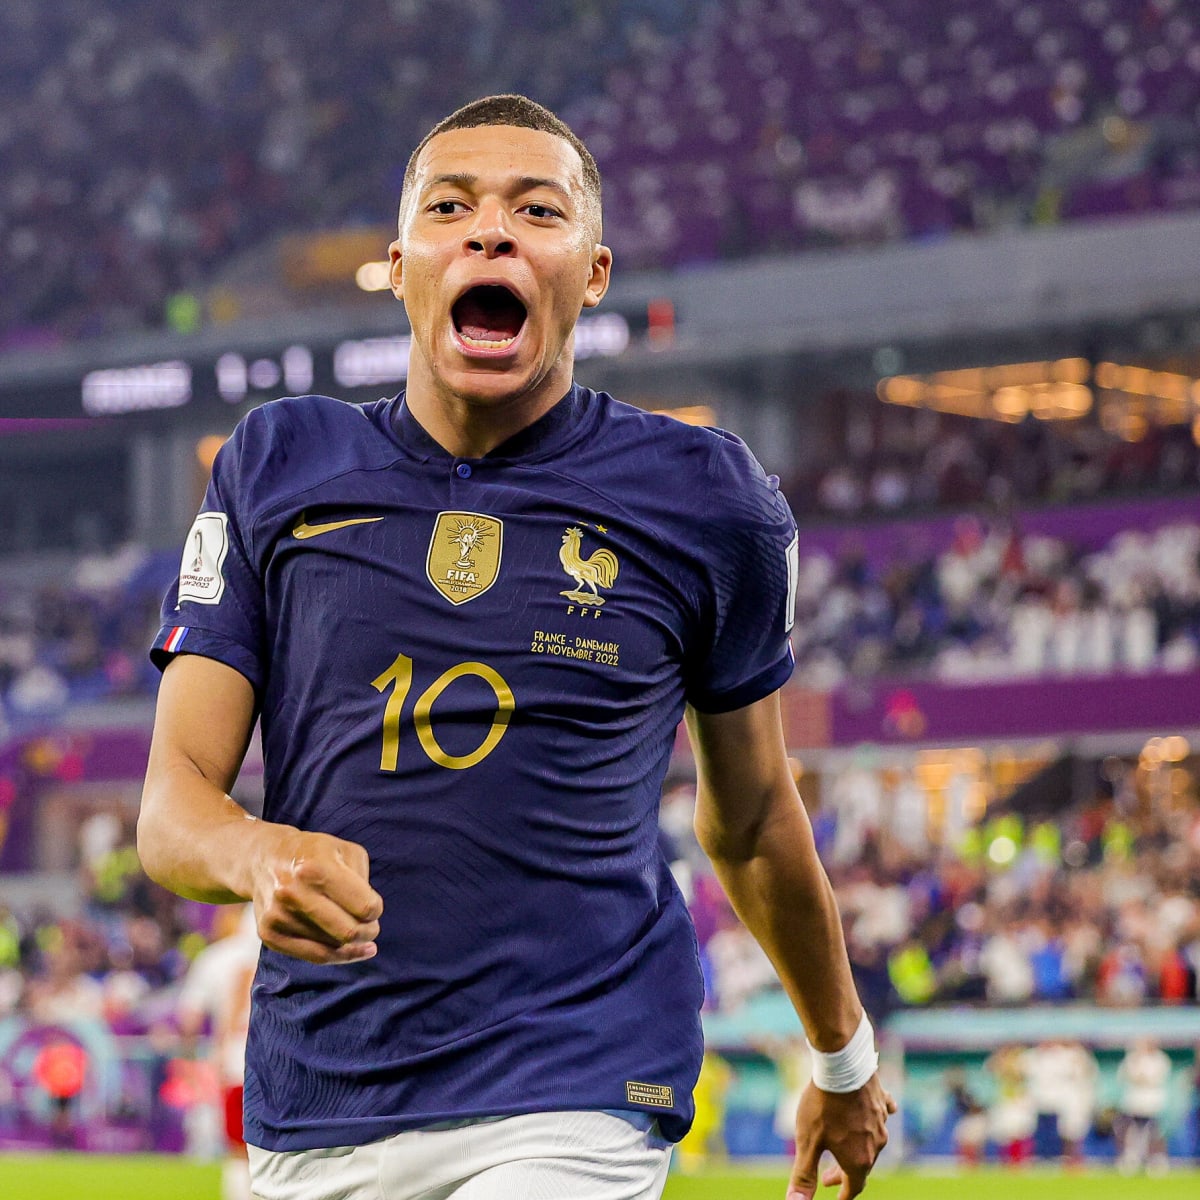 World Cup 2022 top scorers: Kylian Mbappe wins Golden Boot with